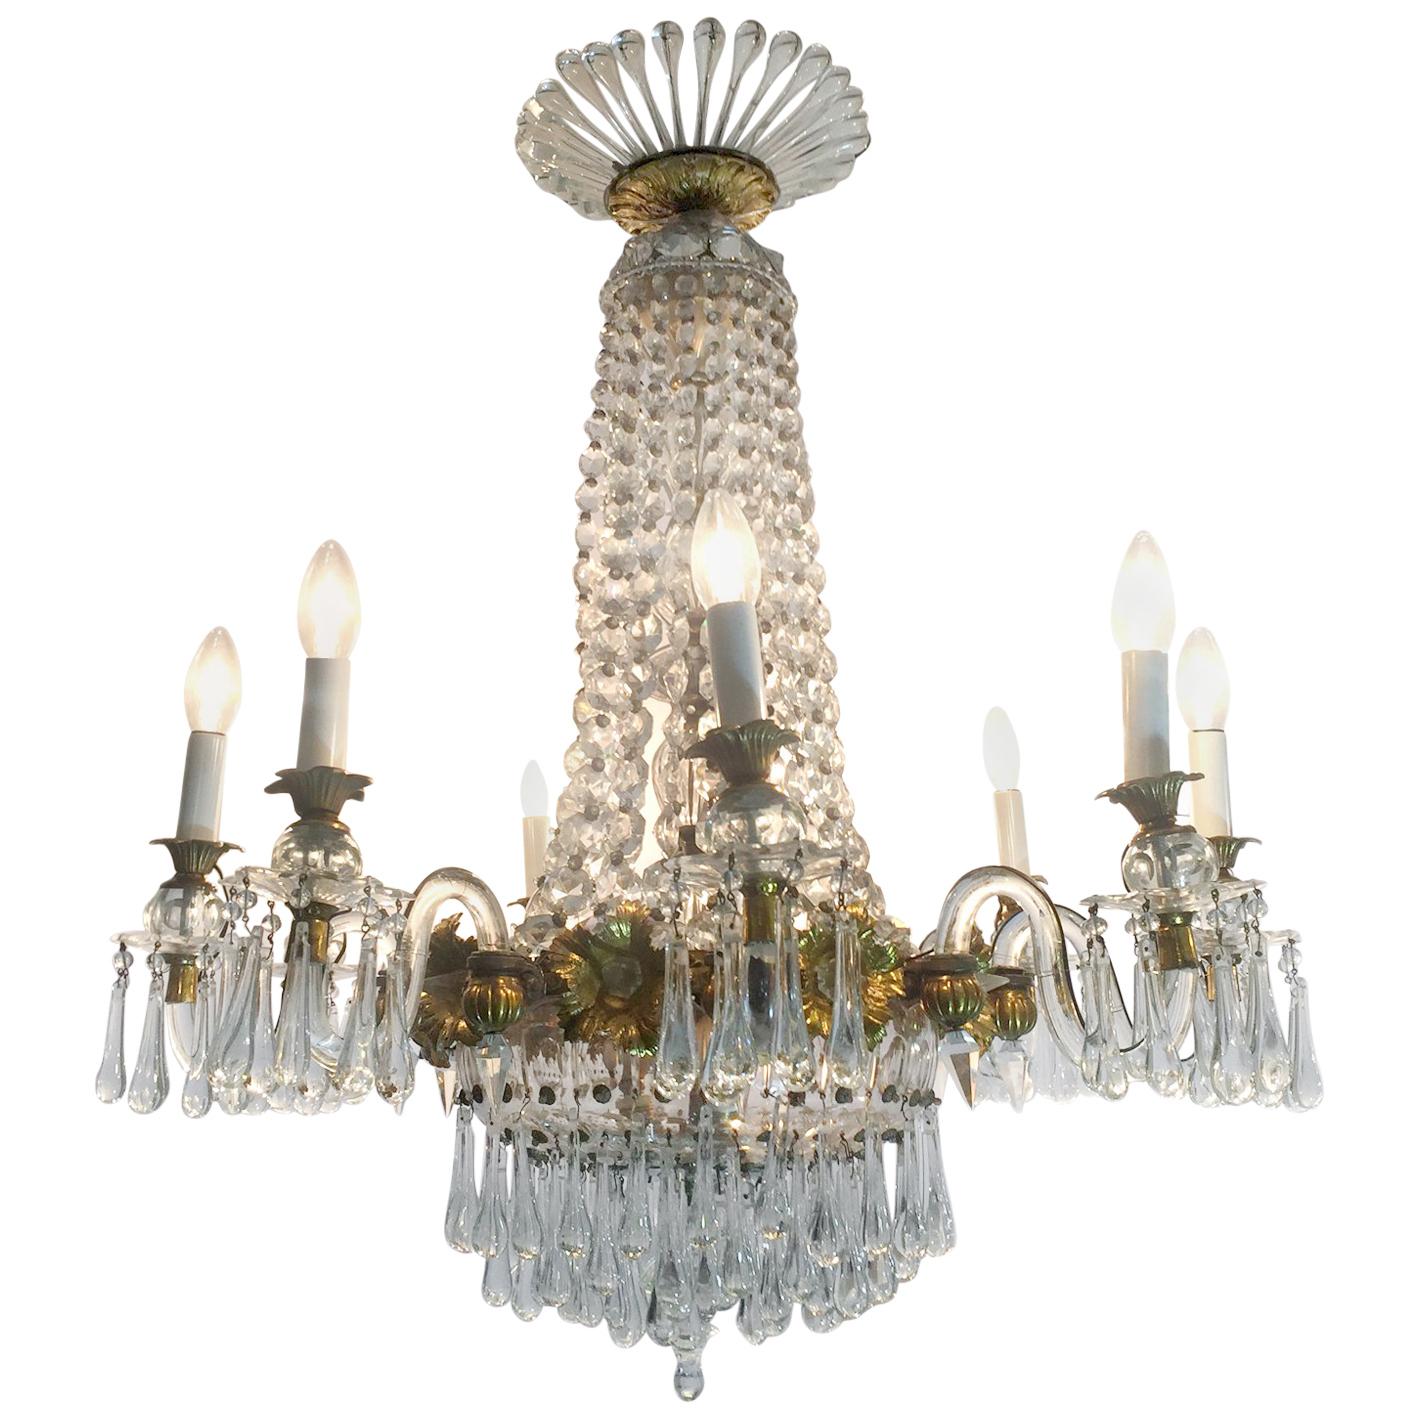 Italian Mid-19th Century Chandelier Gilded Wood and Crystal 12 Lights For Sale